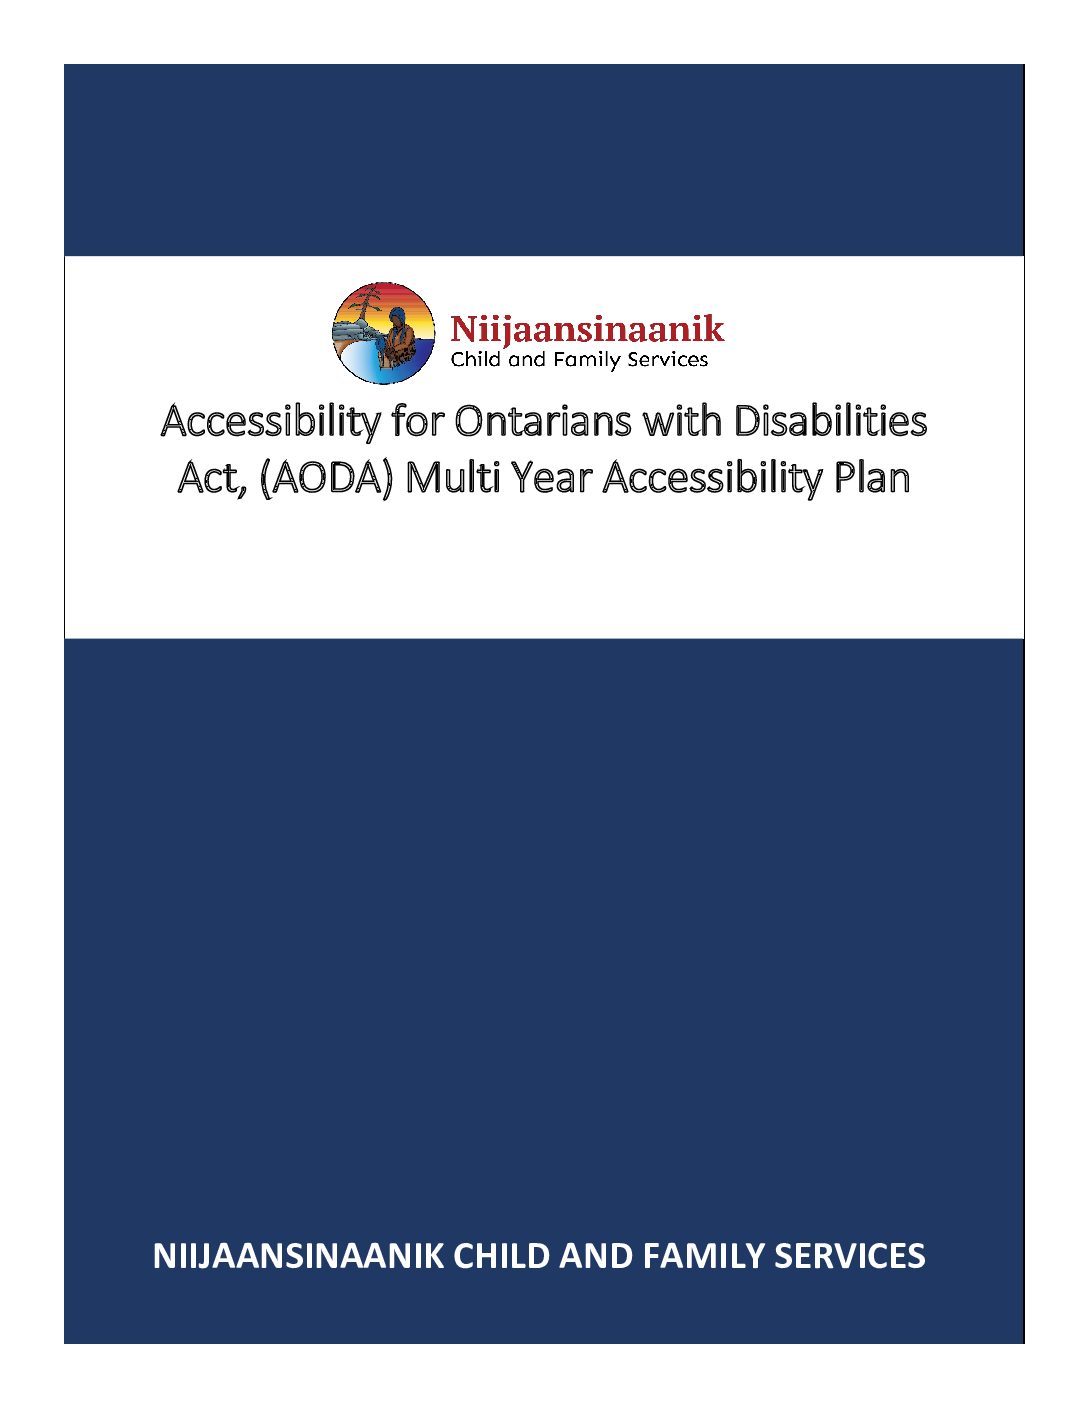 Accessibility for Ontarians with Disabilities Act, (AODA) Multi Year Accessibility Plan